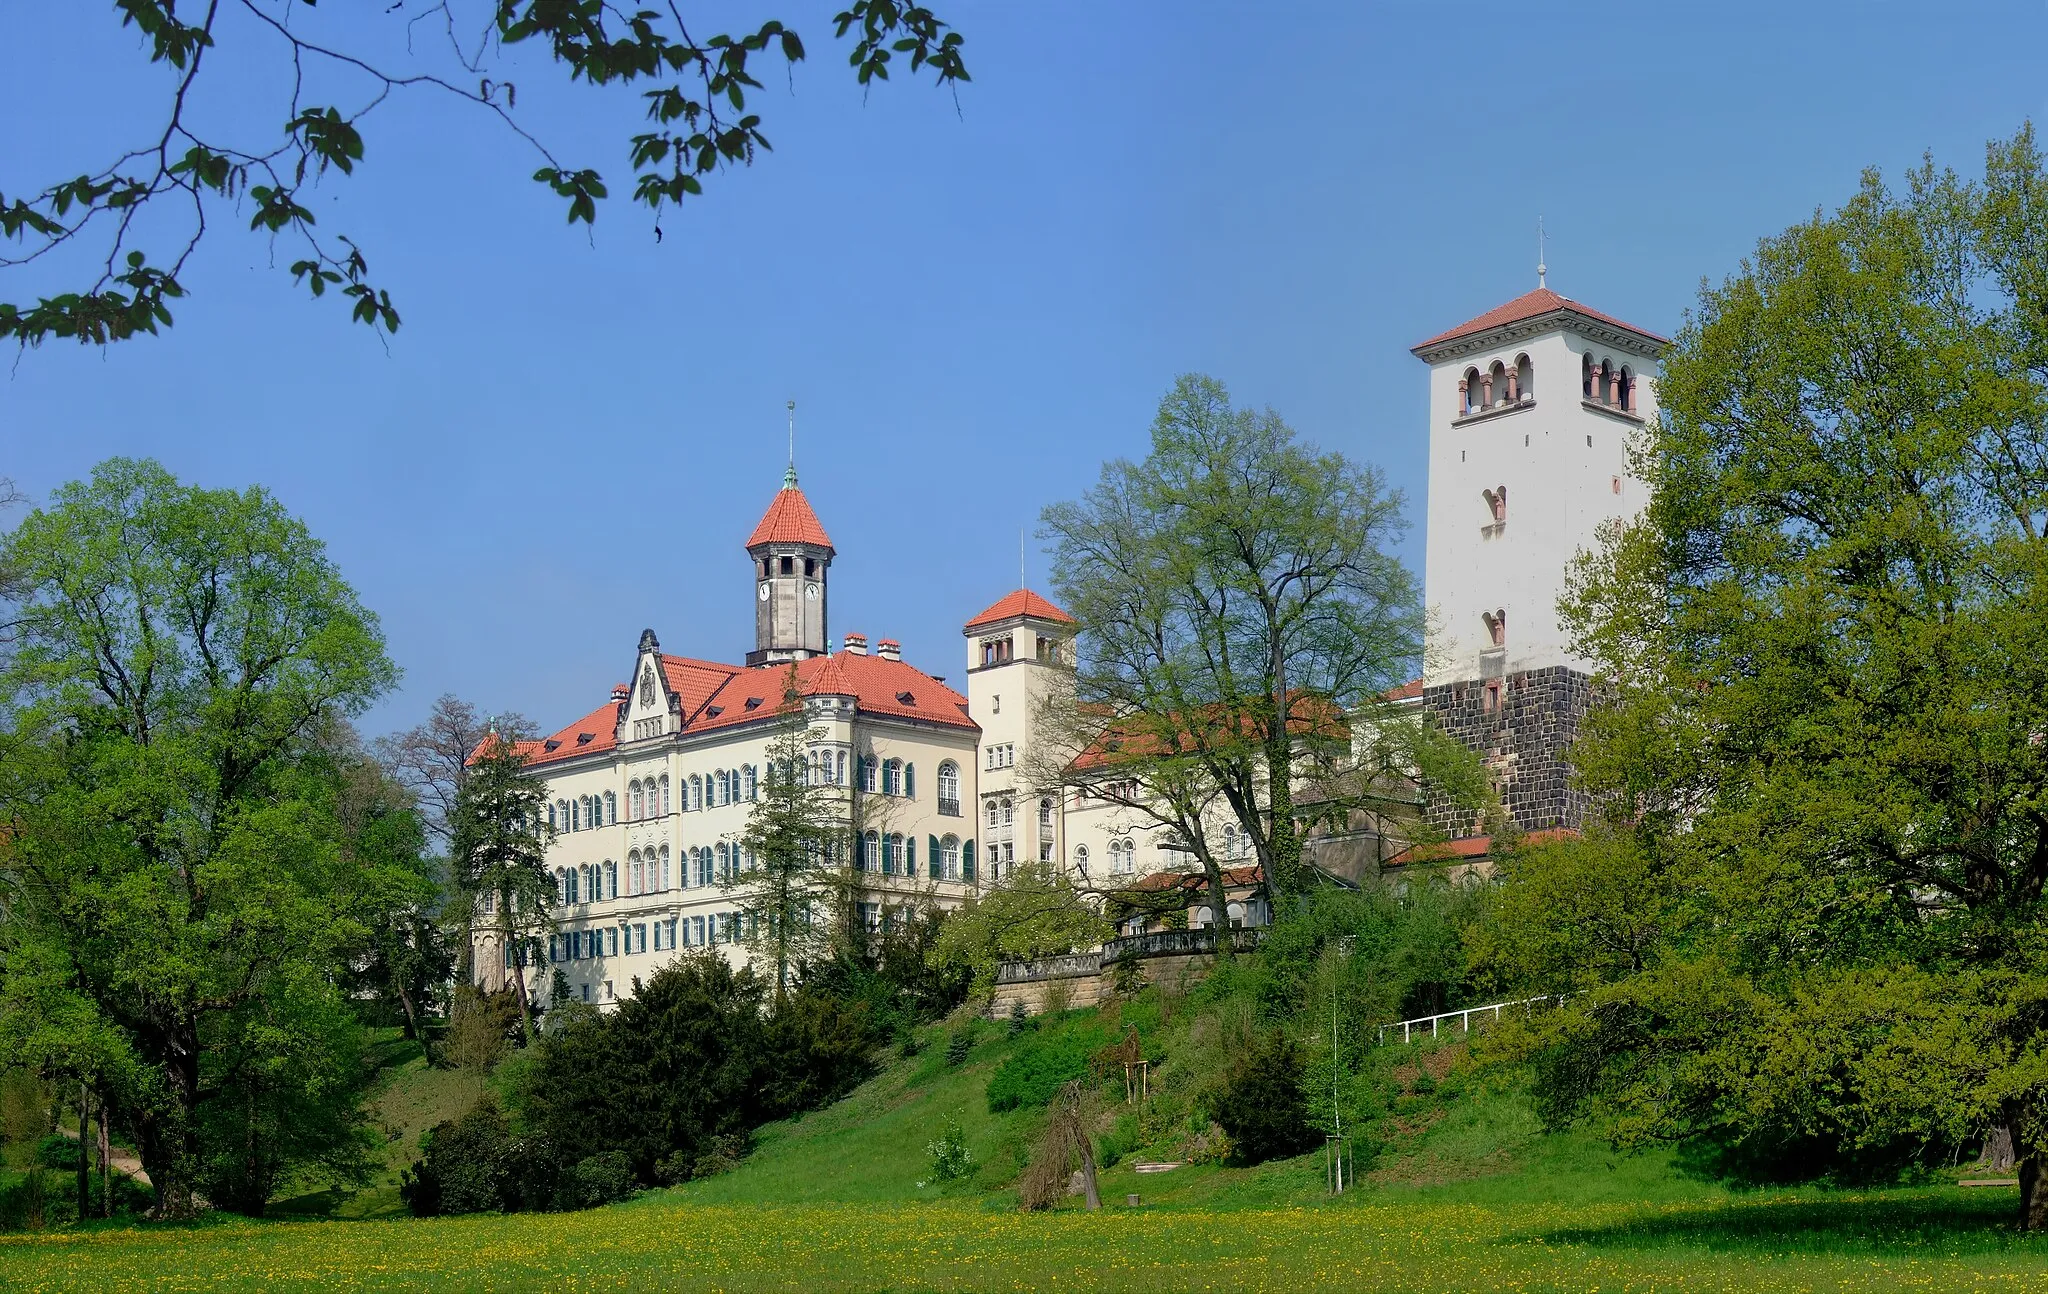 Photo showing: The picture shows the castle in Waldenburg, Saxony / Germany.